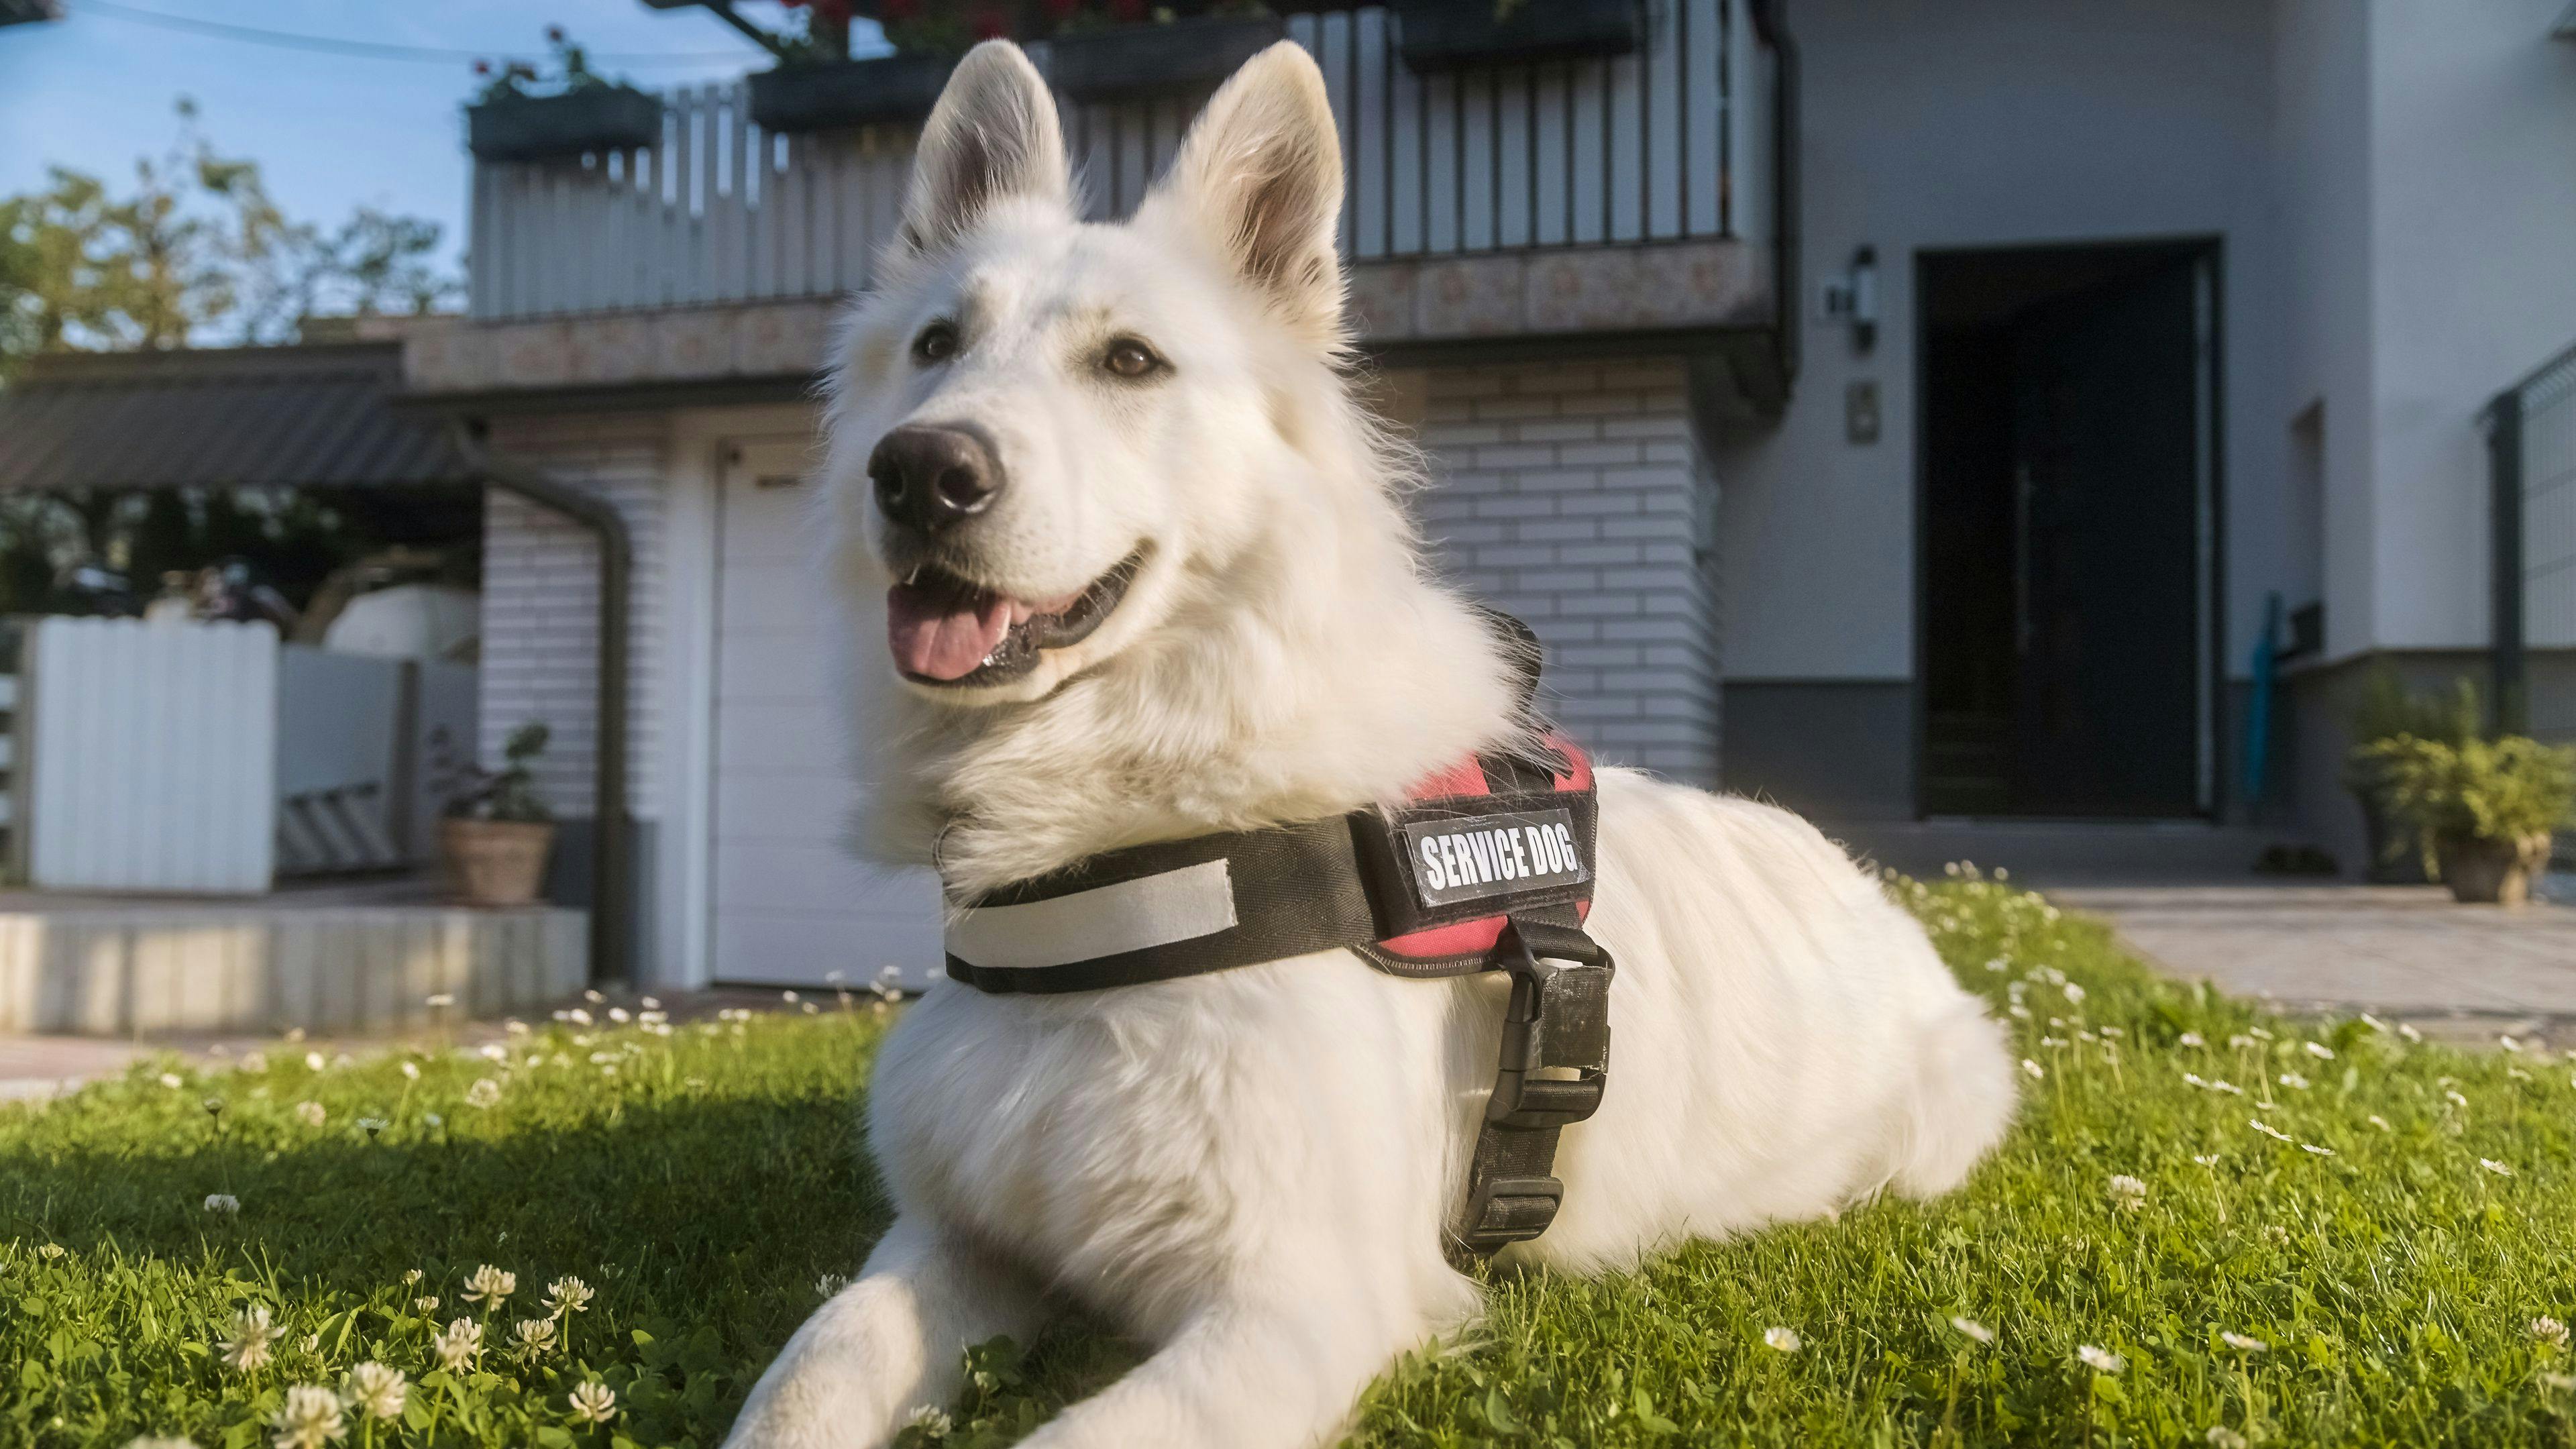 Veterans report healthier cortisol levels from the support and companionship of service dogs